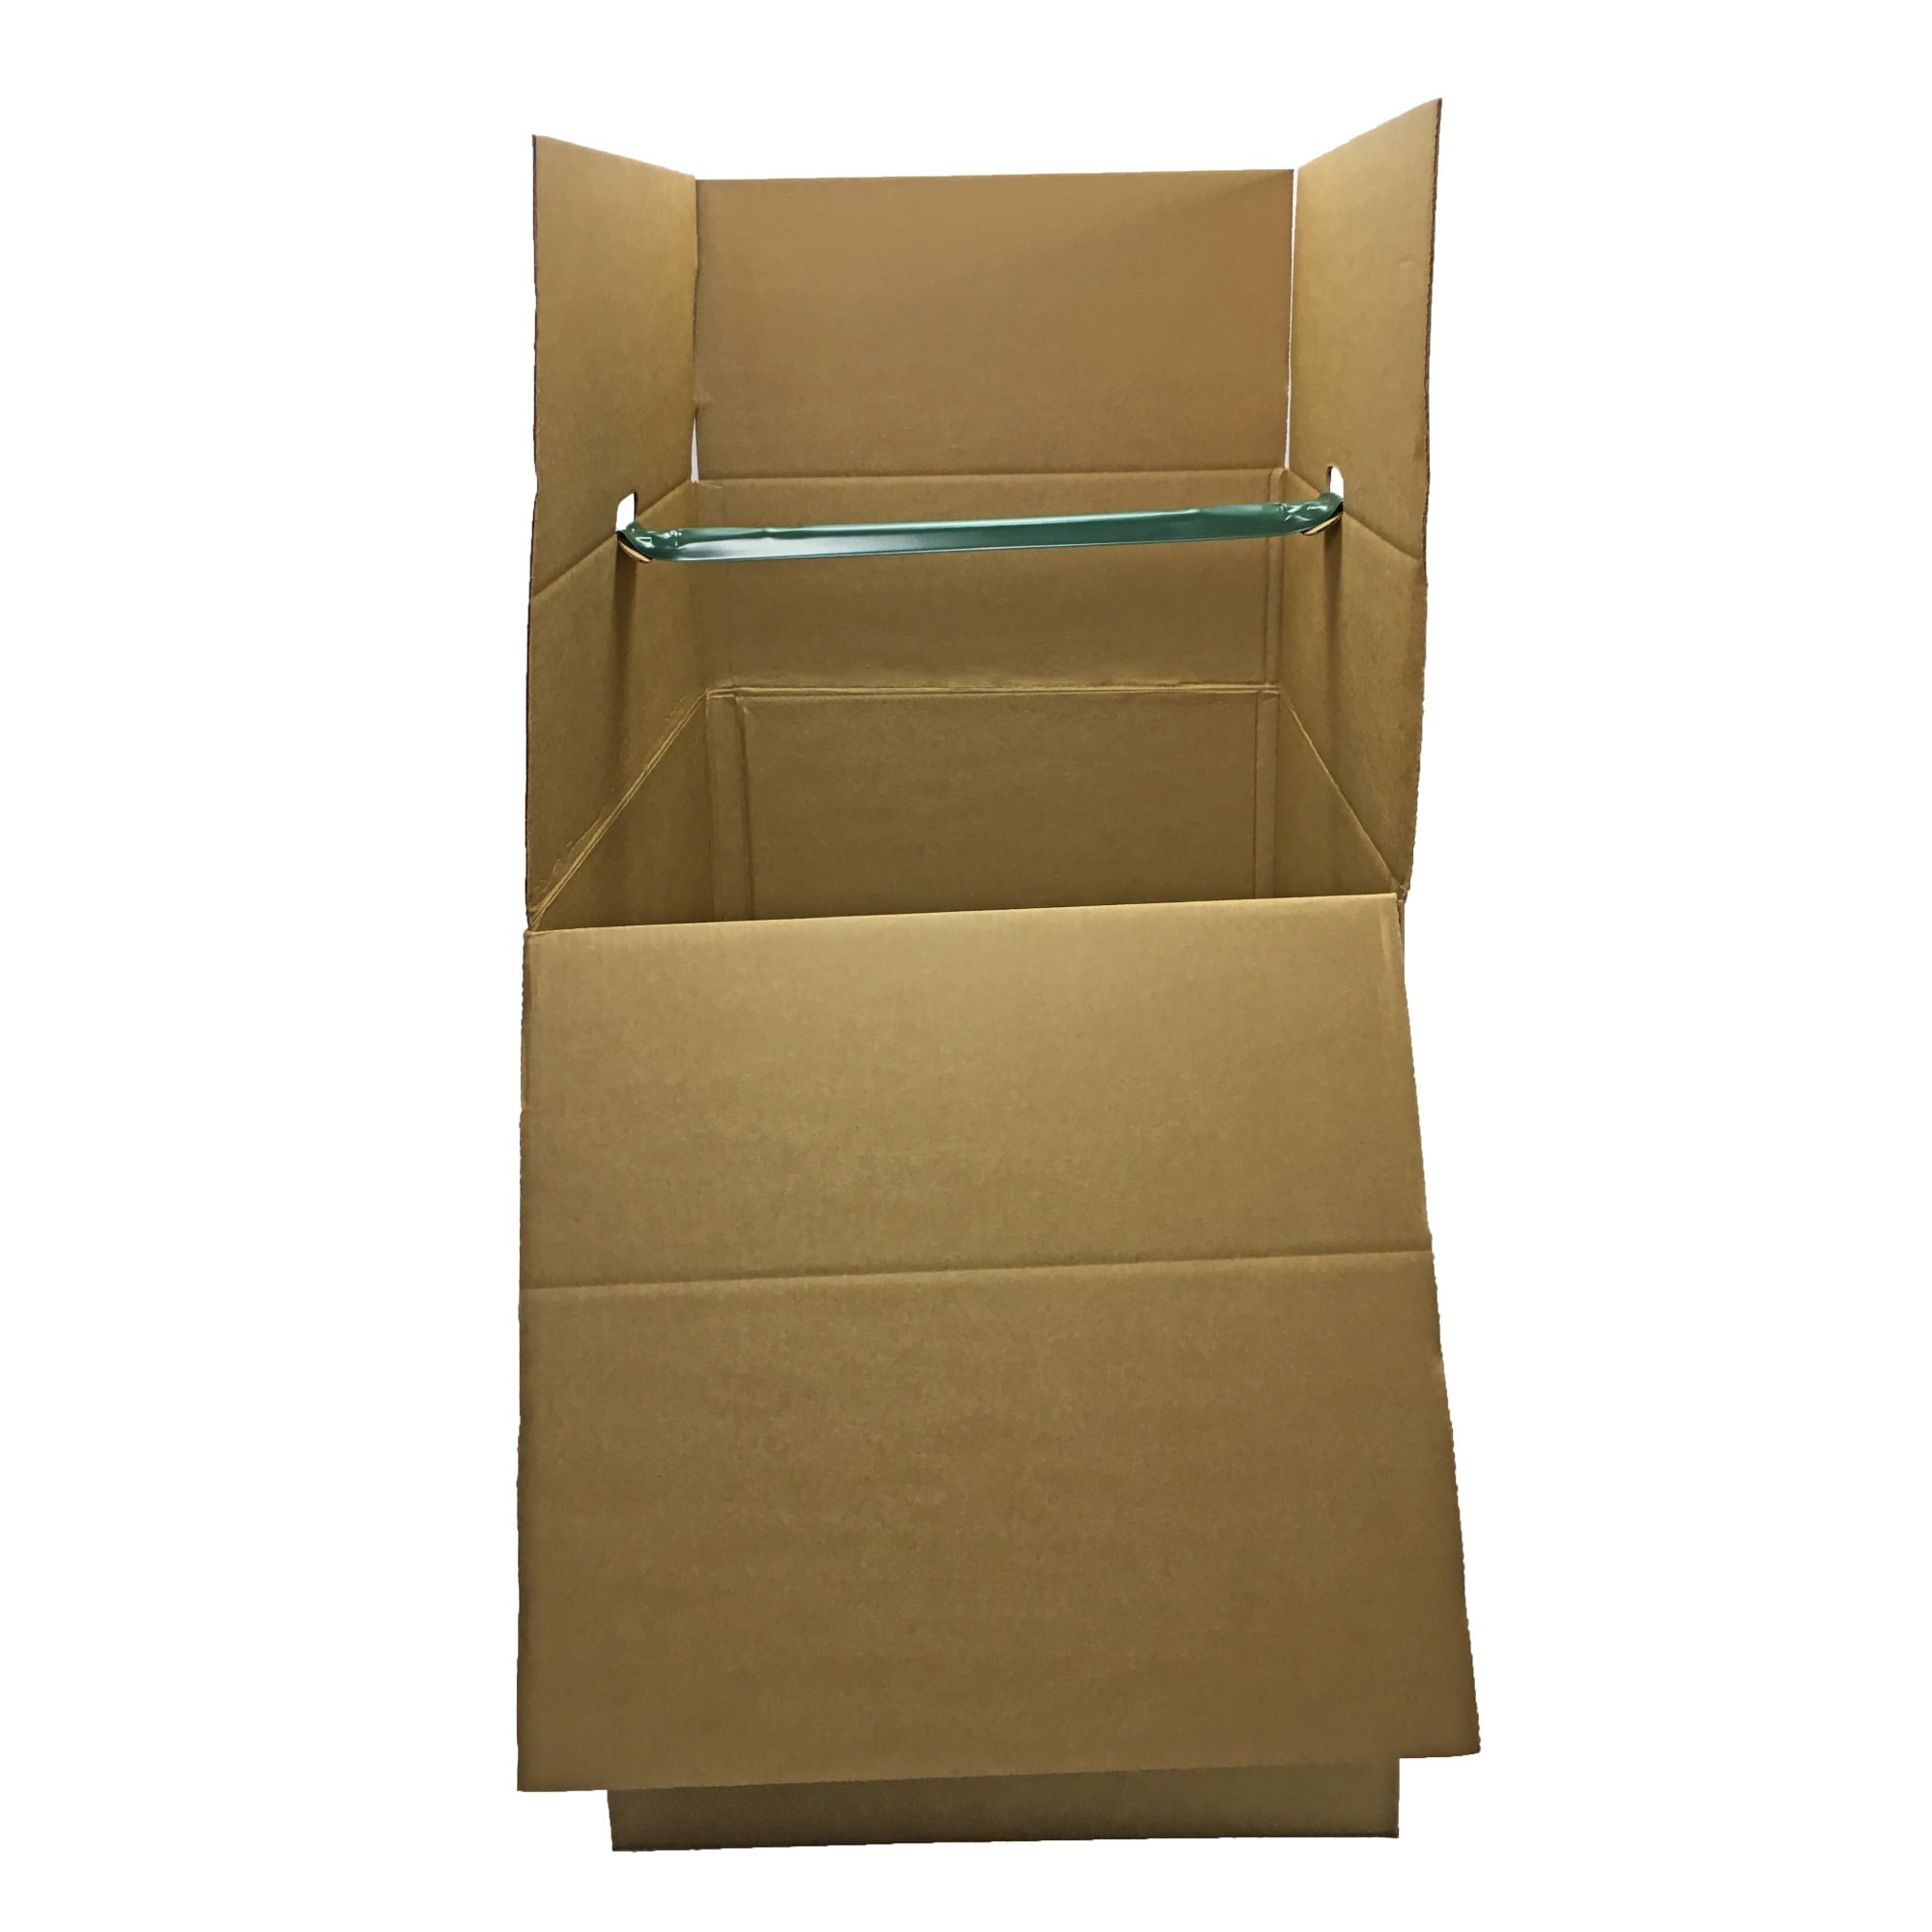 40 CARDBOARD BOXES PRO #1 HOUSE REMOVAL PACKING KIT INCLUDING DOUBLE WALL 